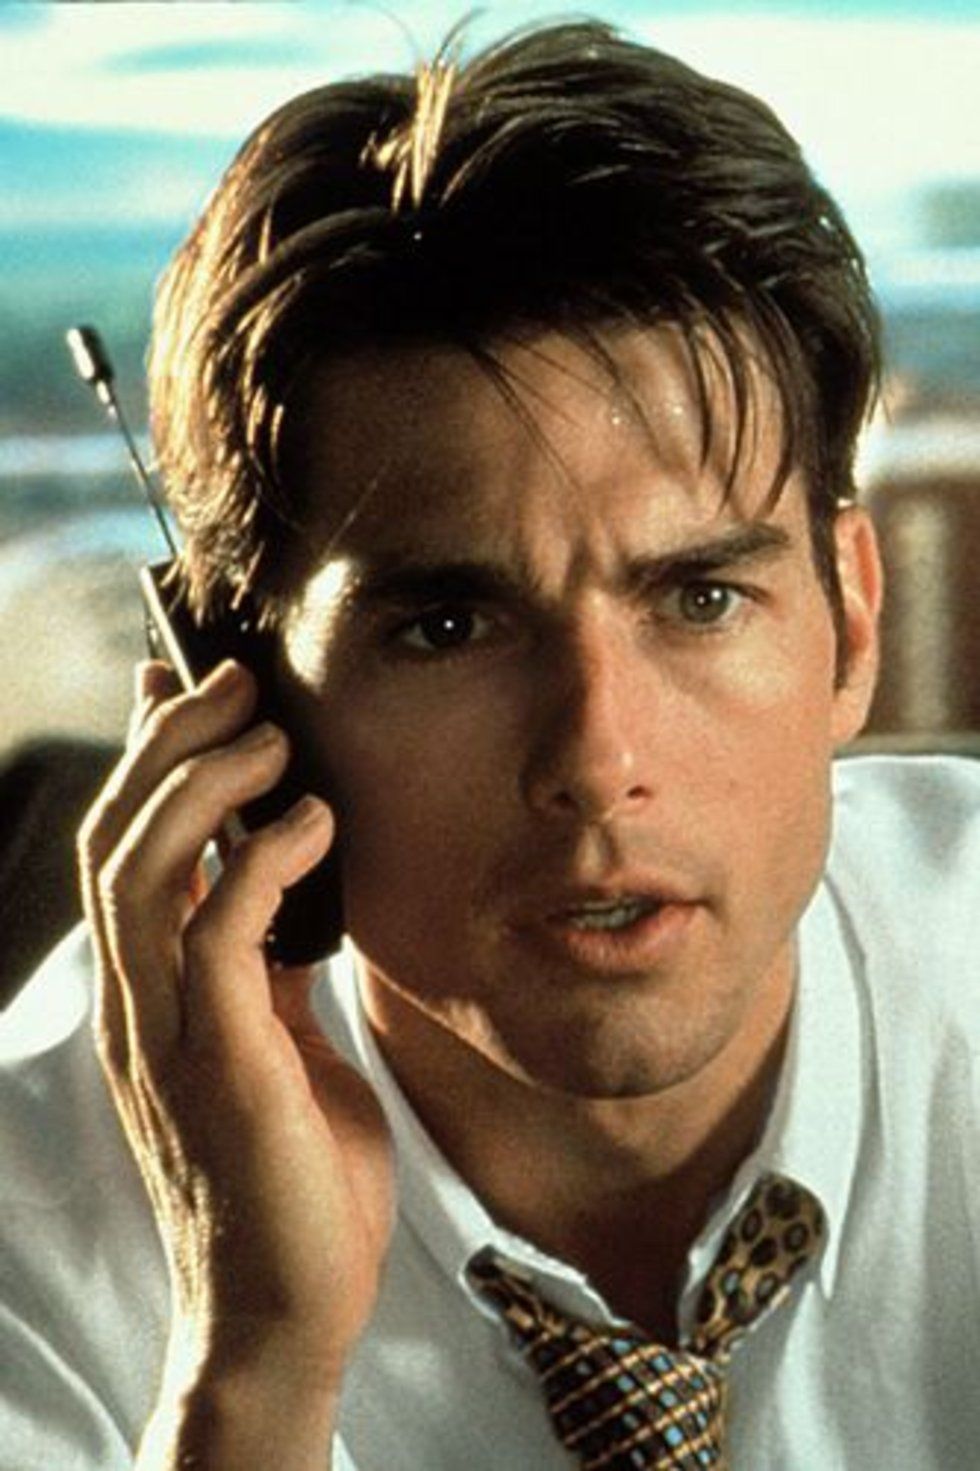 Jerry Maguire [1996] directed by Cameron Crowe, starring Tom Cruise, Cuba Gooding, Jr., Renee Zellweger, Kelly Pr. Tom cruise young, Tom cruise movies, Tom cruise